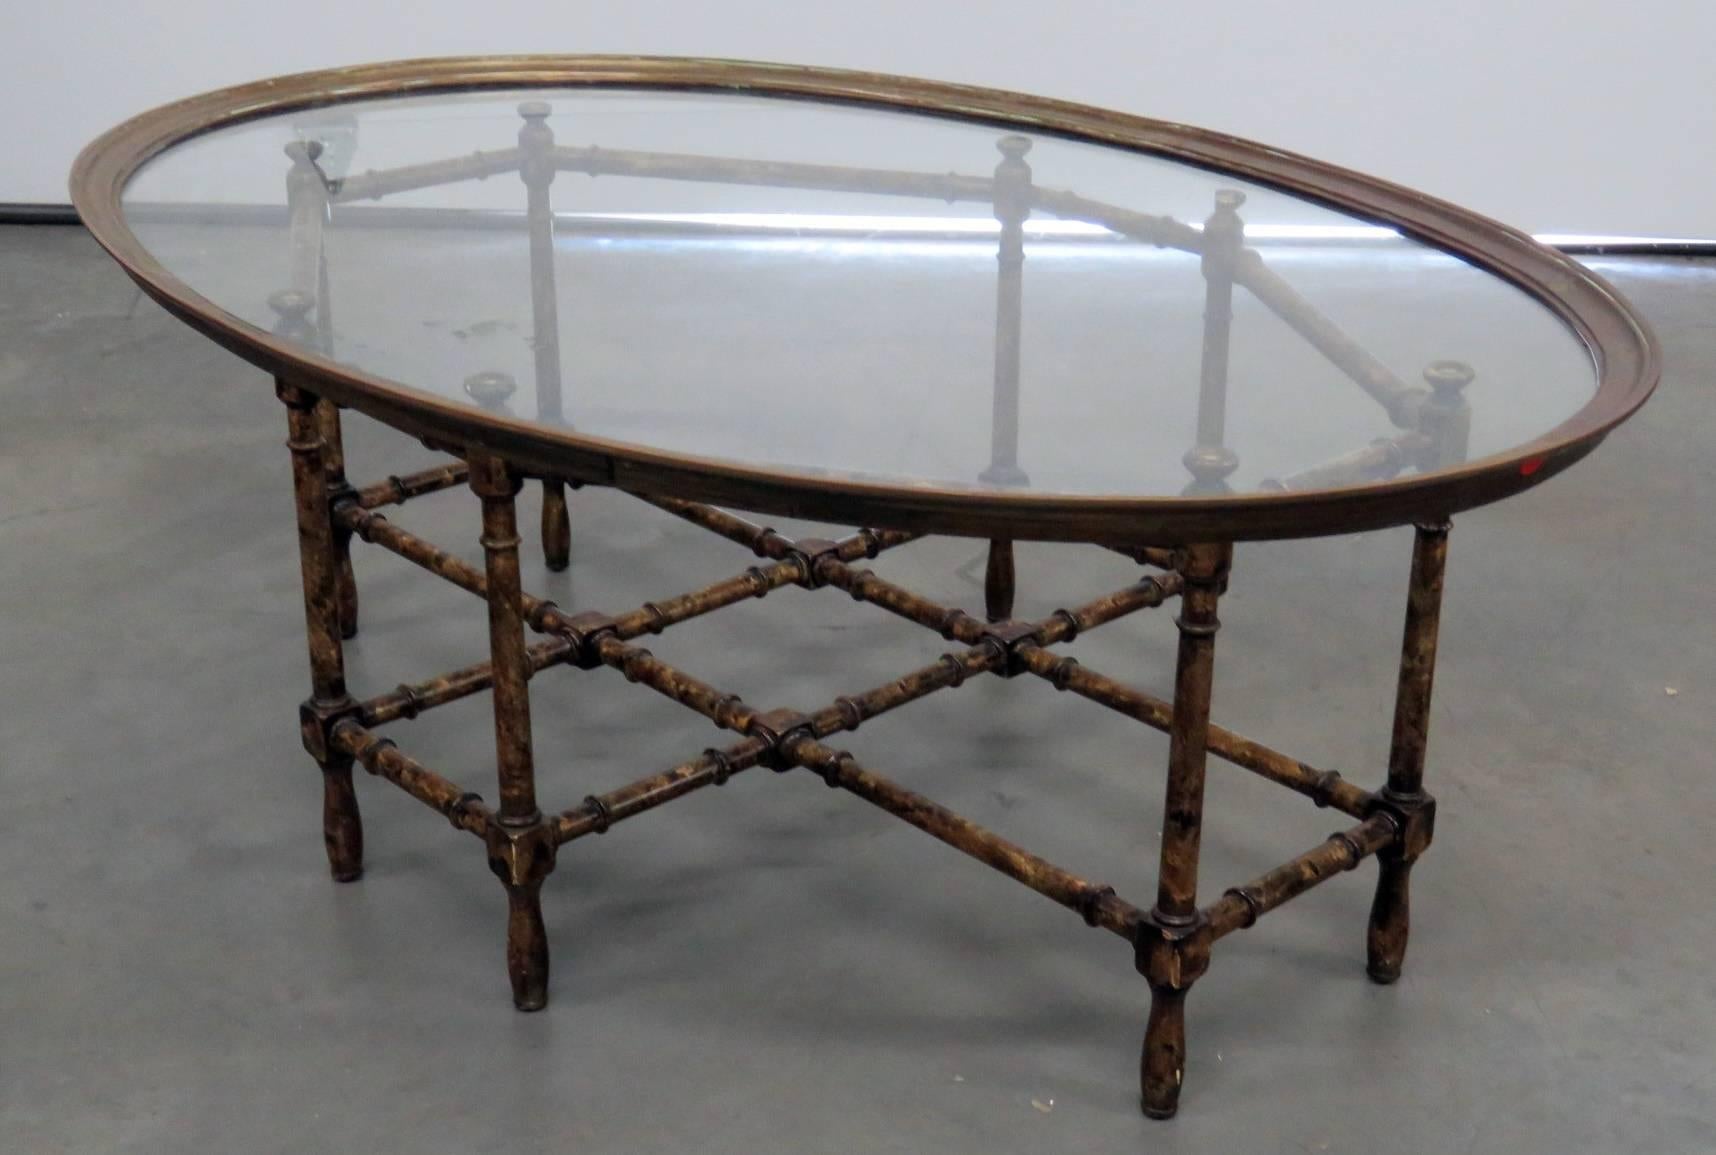 Faux bamboo tray top table with a glass insert.